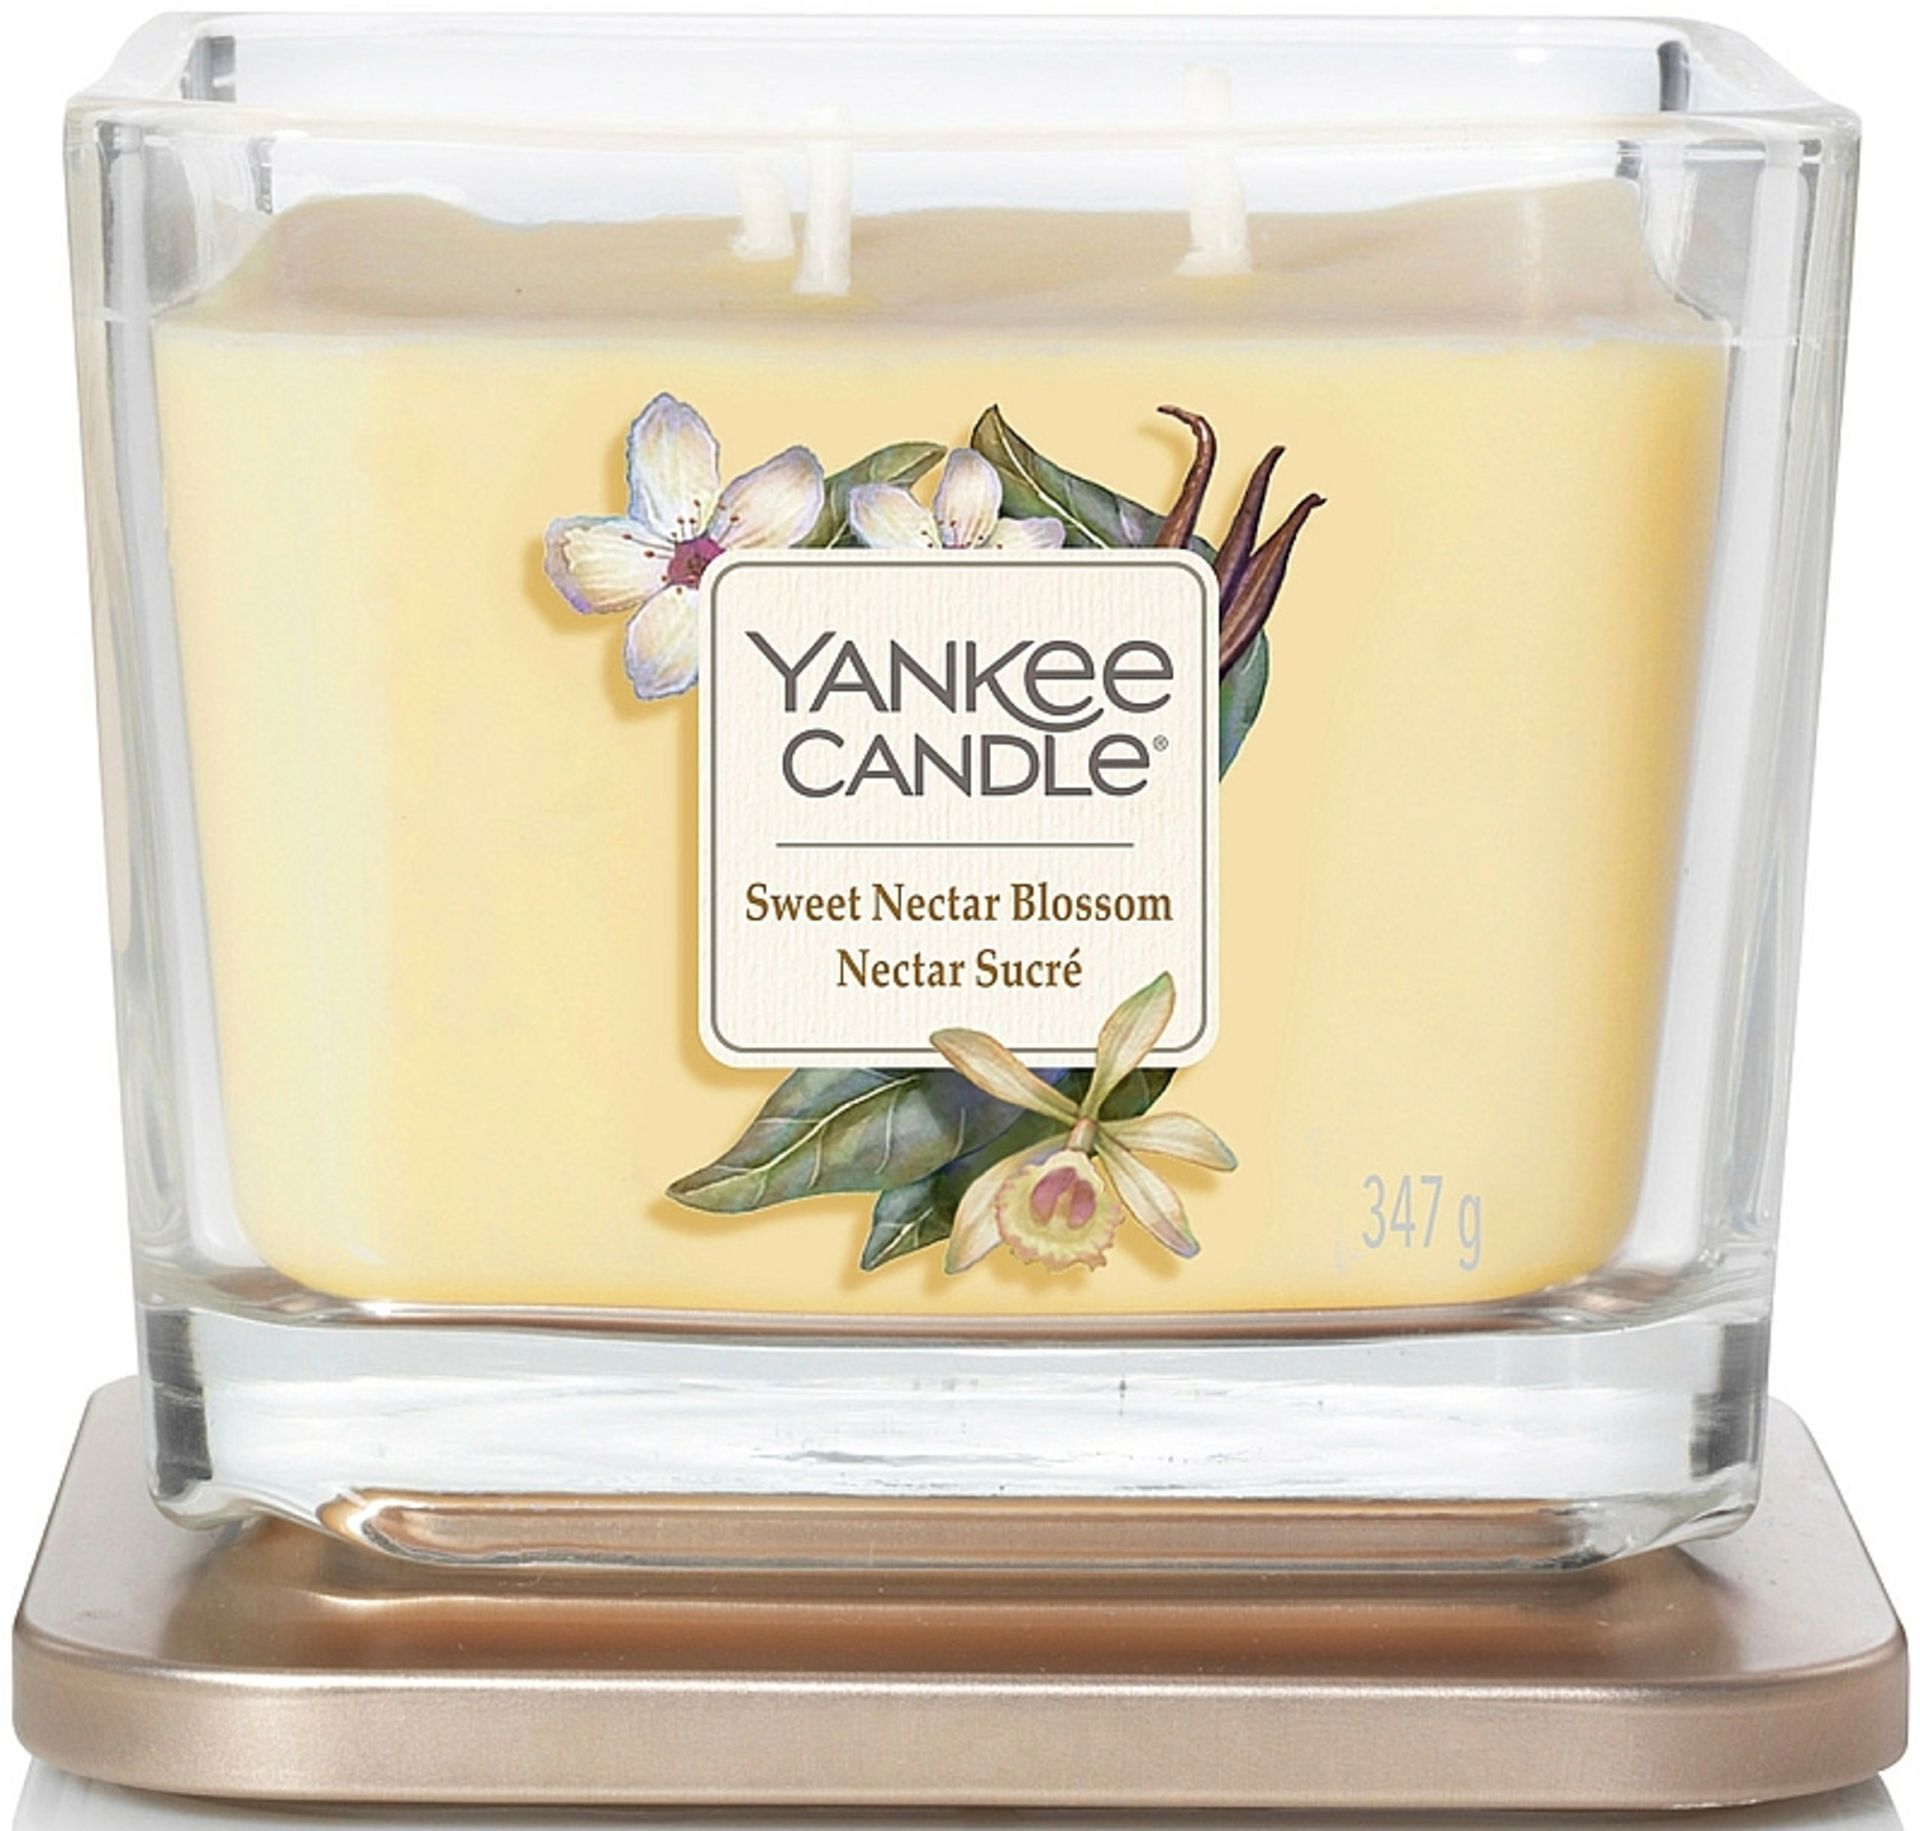 RRP £9.99 - New 96g Sweet Nectar Blossom Yankee Candle